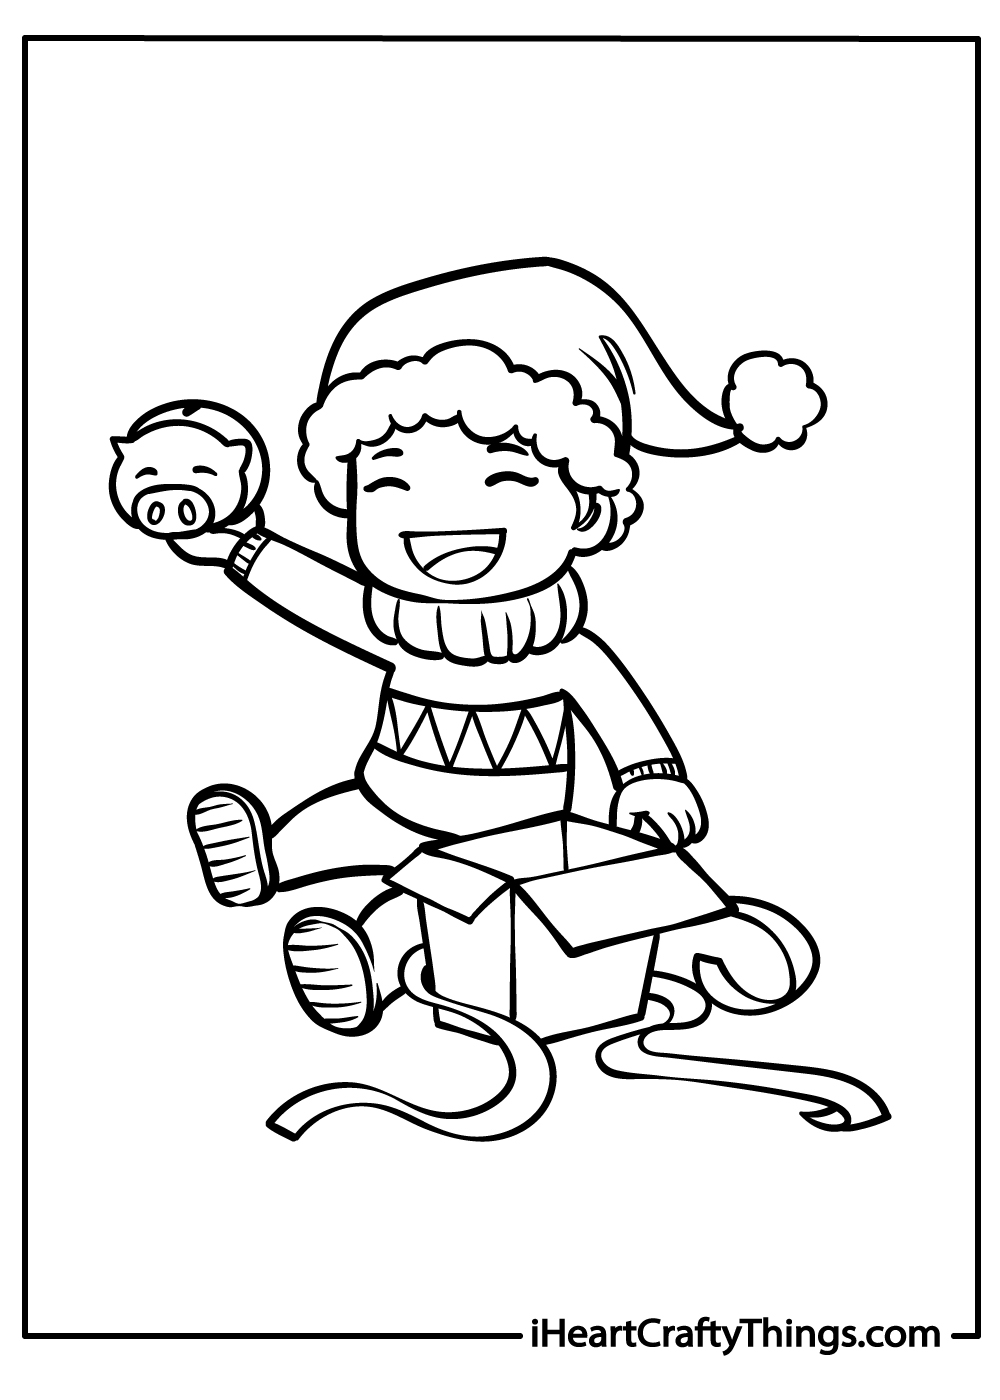 original Christmas presents coloring pages